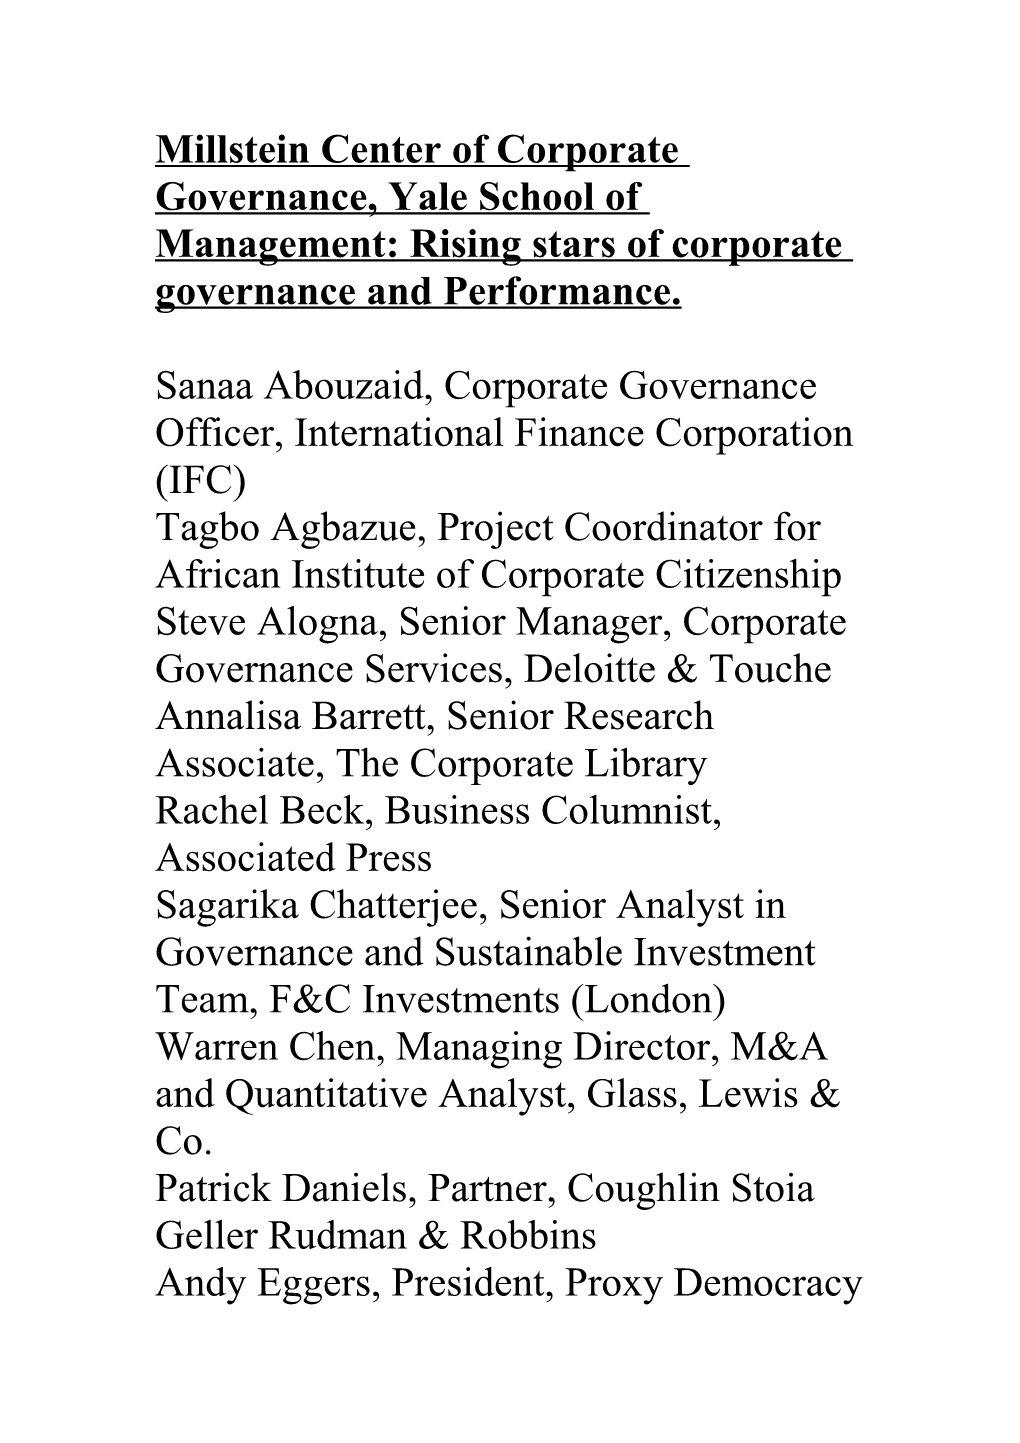 The Full List of Rising Stars of Corporate Governance Are